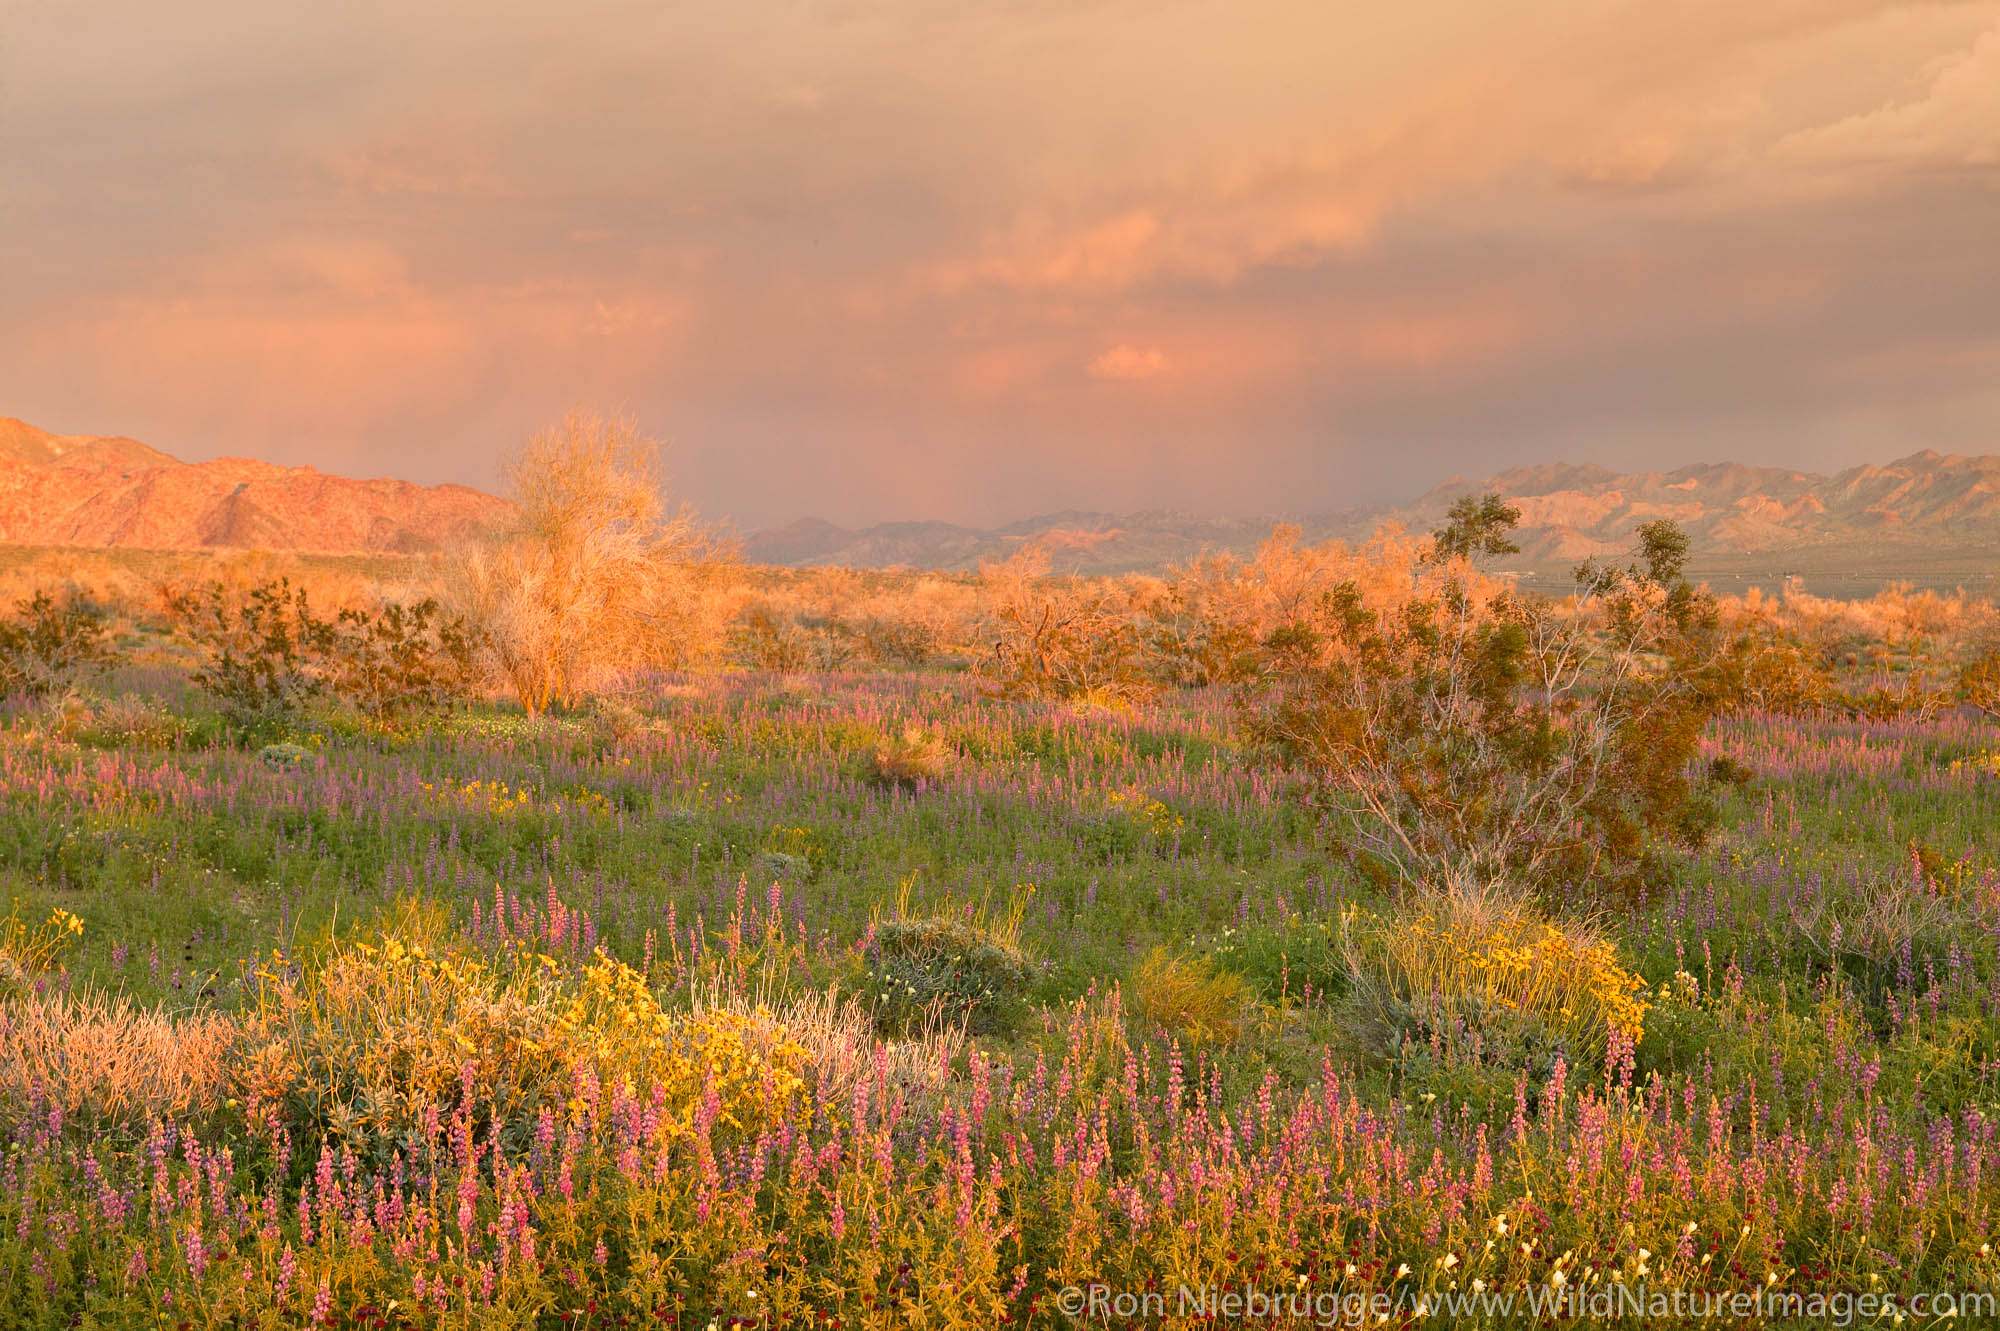 These fields of spring wildflowers included Lupine and Brittlebrush (Encelia farinosa), Joshua Tree National Park, California...